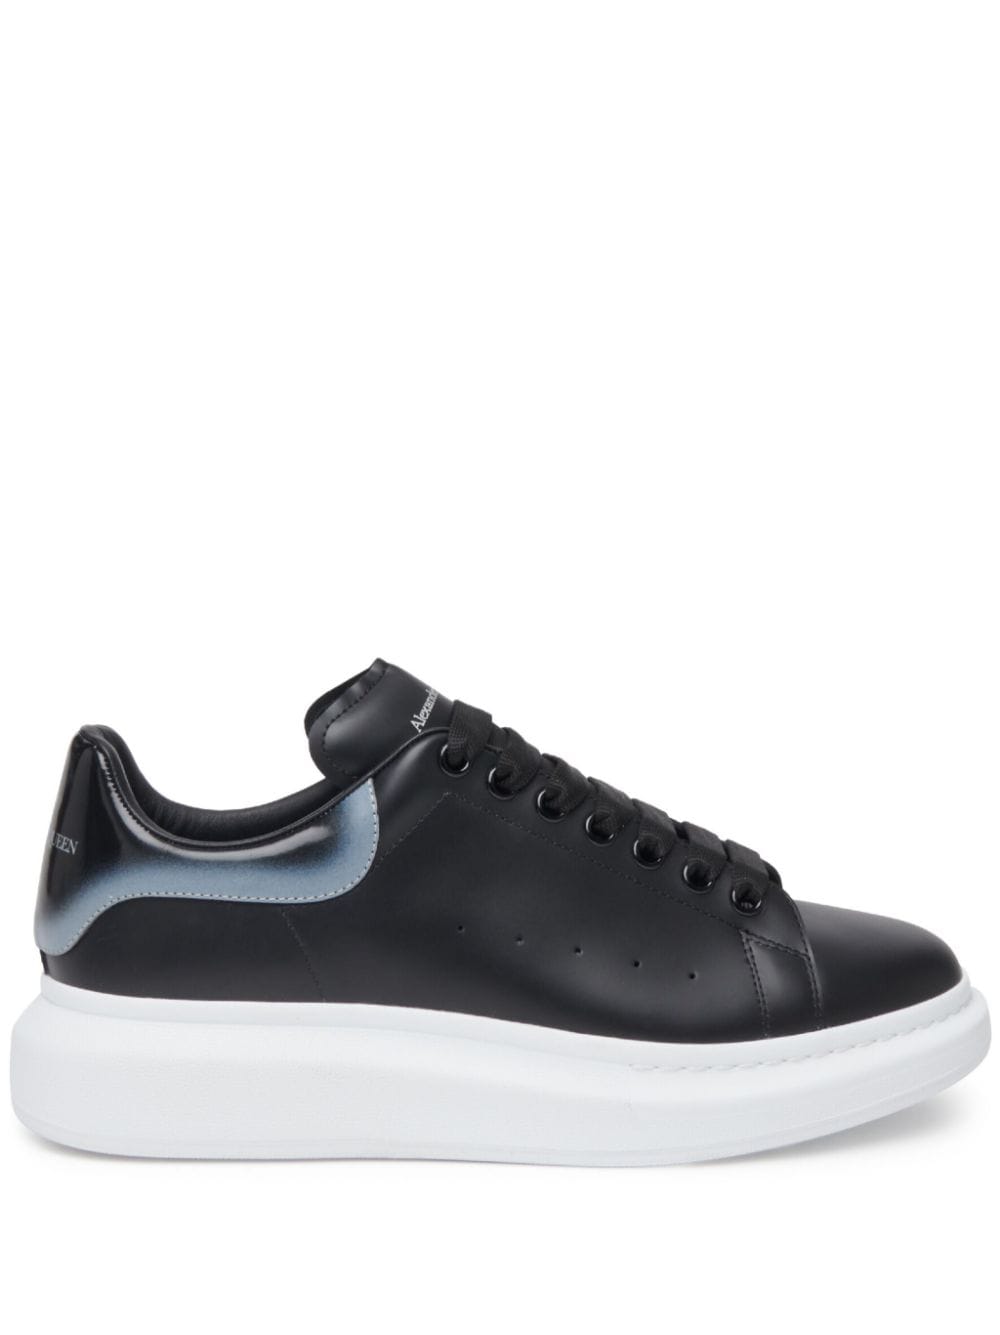 Shop Alexander Mcqueen Men's Oversized Black Leather Sneakers With Chunky Rubber Sole